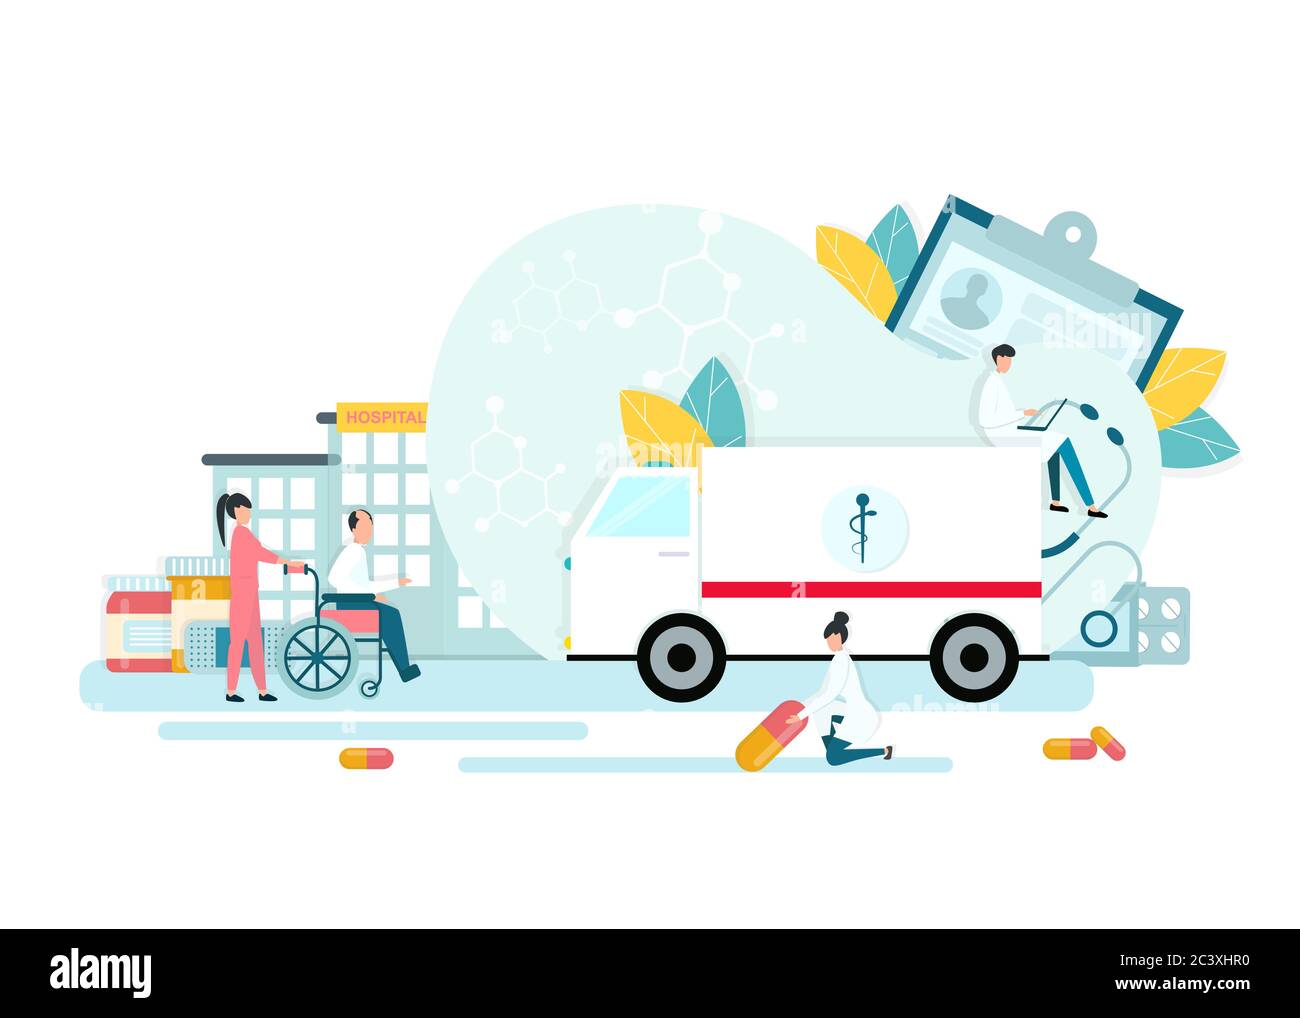 Medical Services. Modern Hospital Exterior With Ambulance, Doctors, Nurses And Patients, Vector Stock Vector